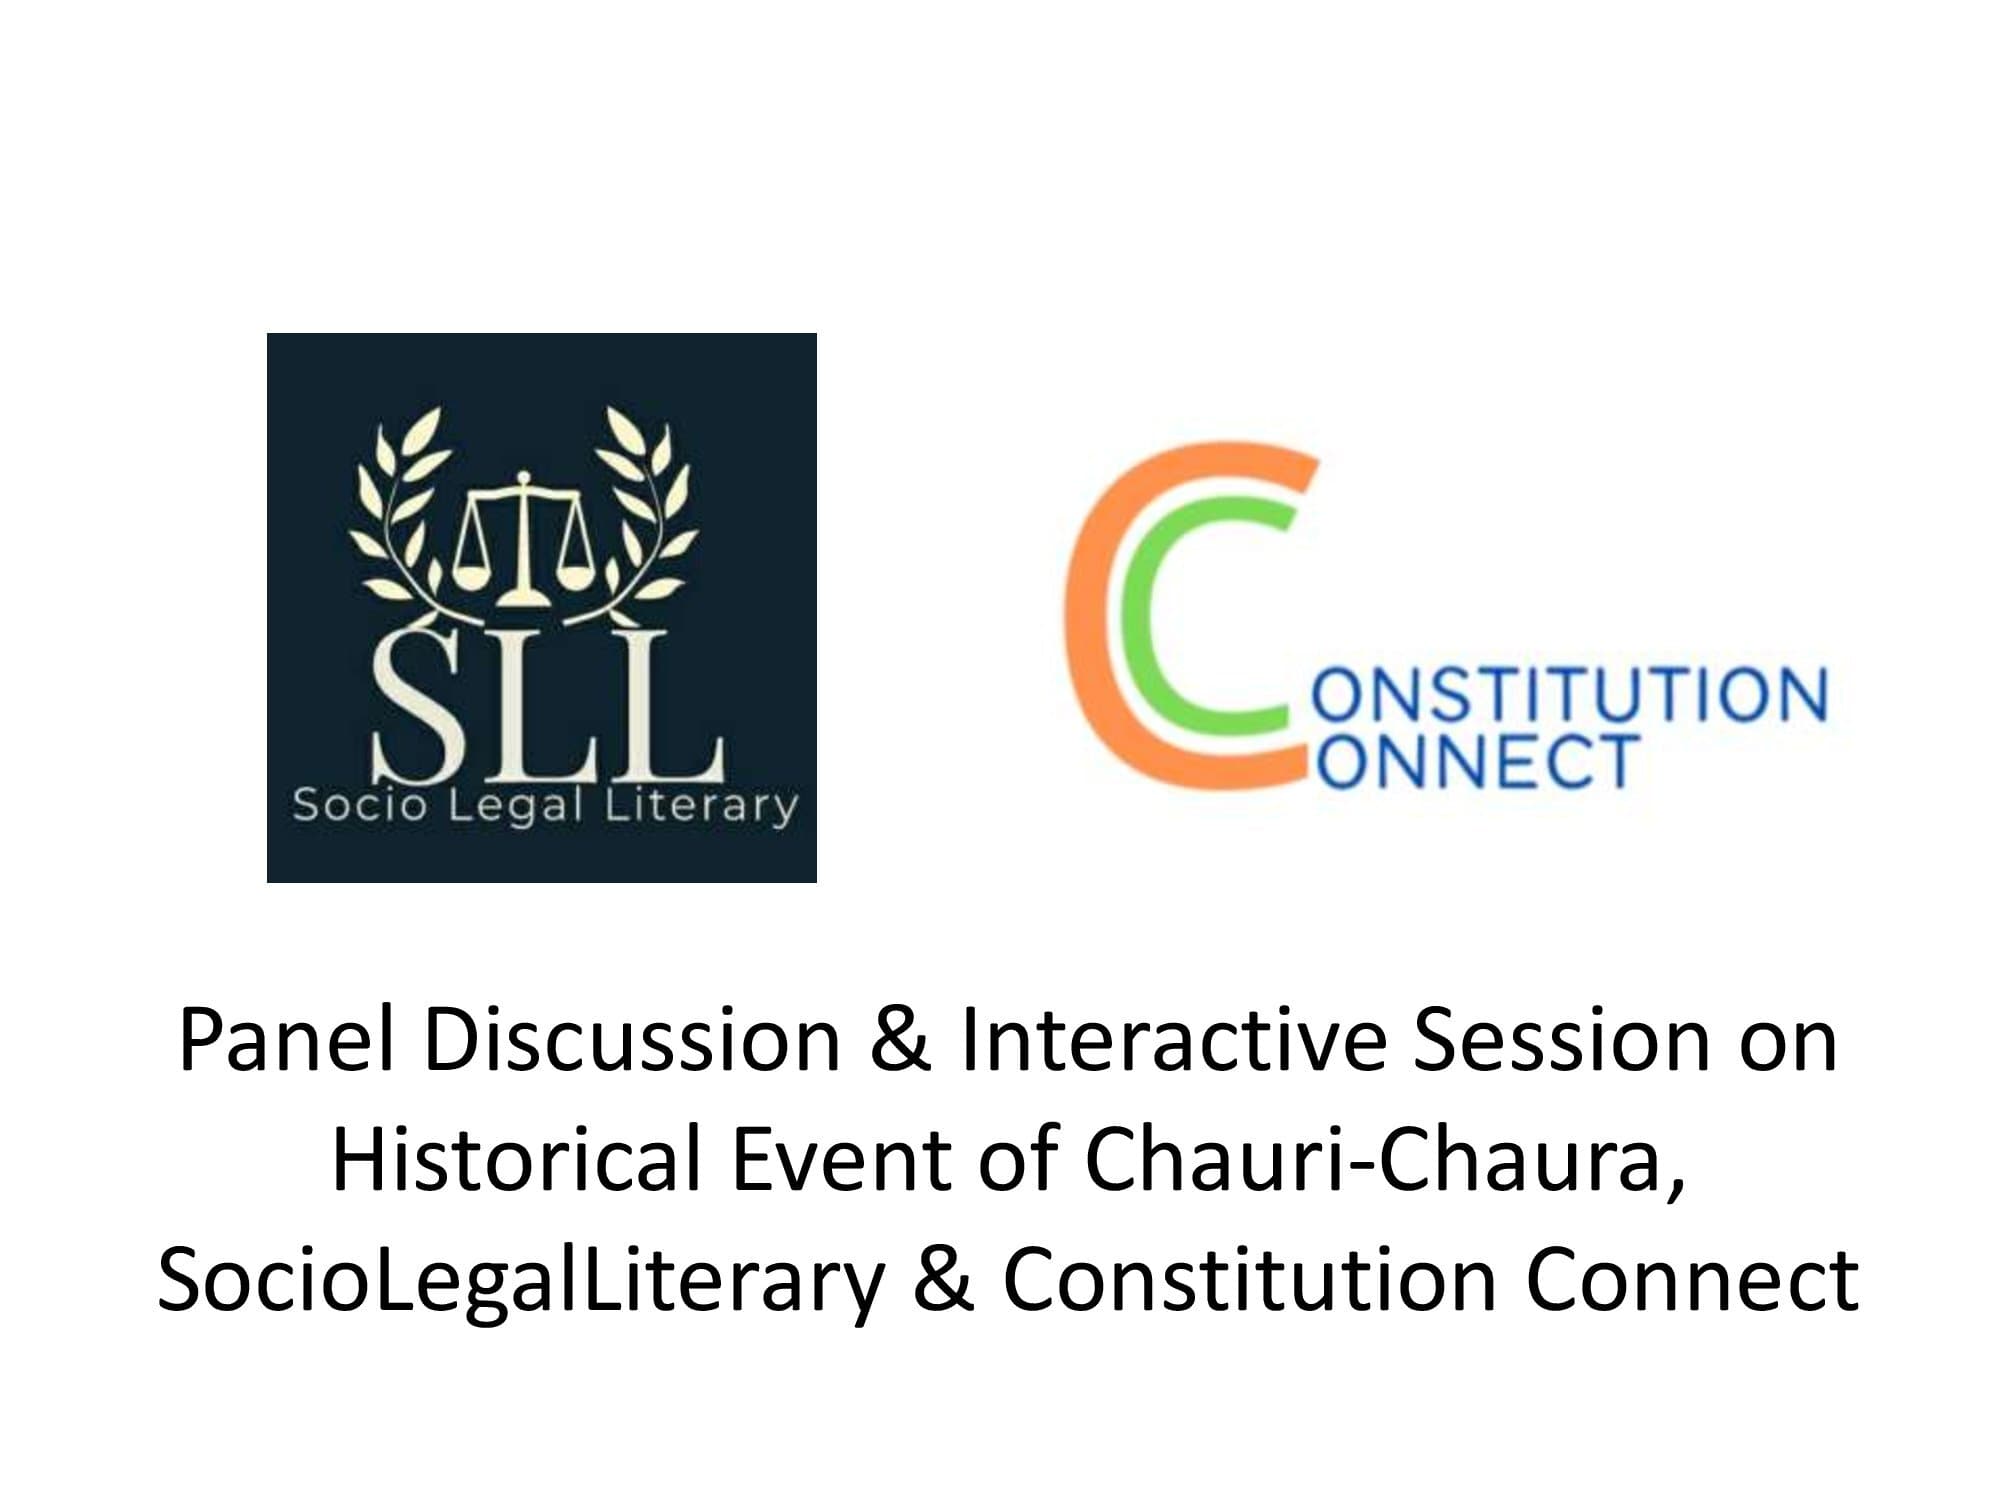 Panel Discussion & Interactive Session on Historical Event of Chauri-Chaura, SocioLegalLiterary & Constitution Connect